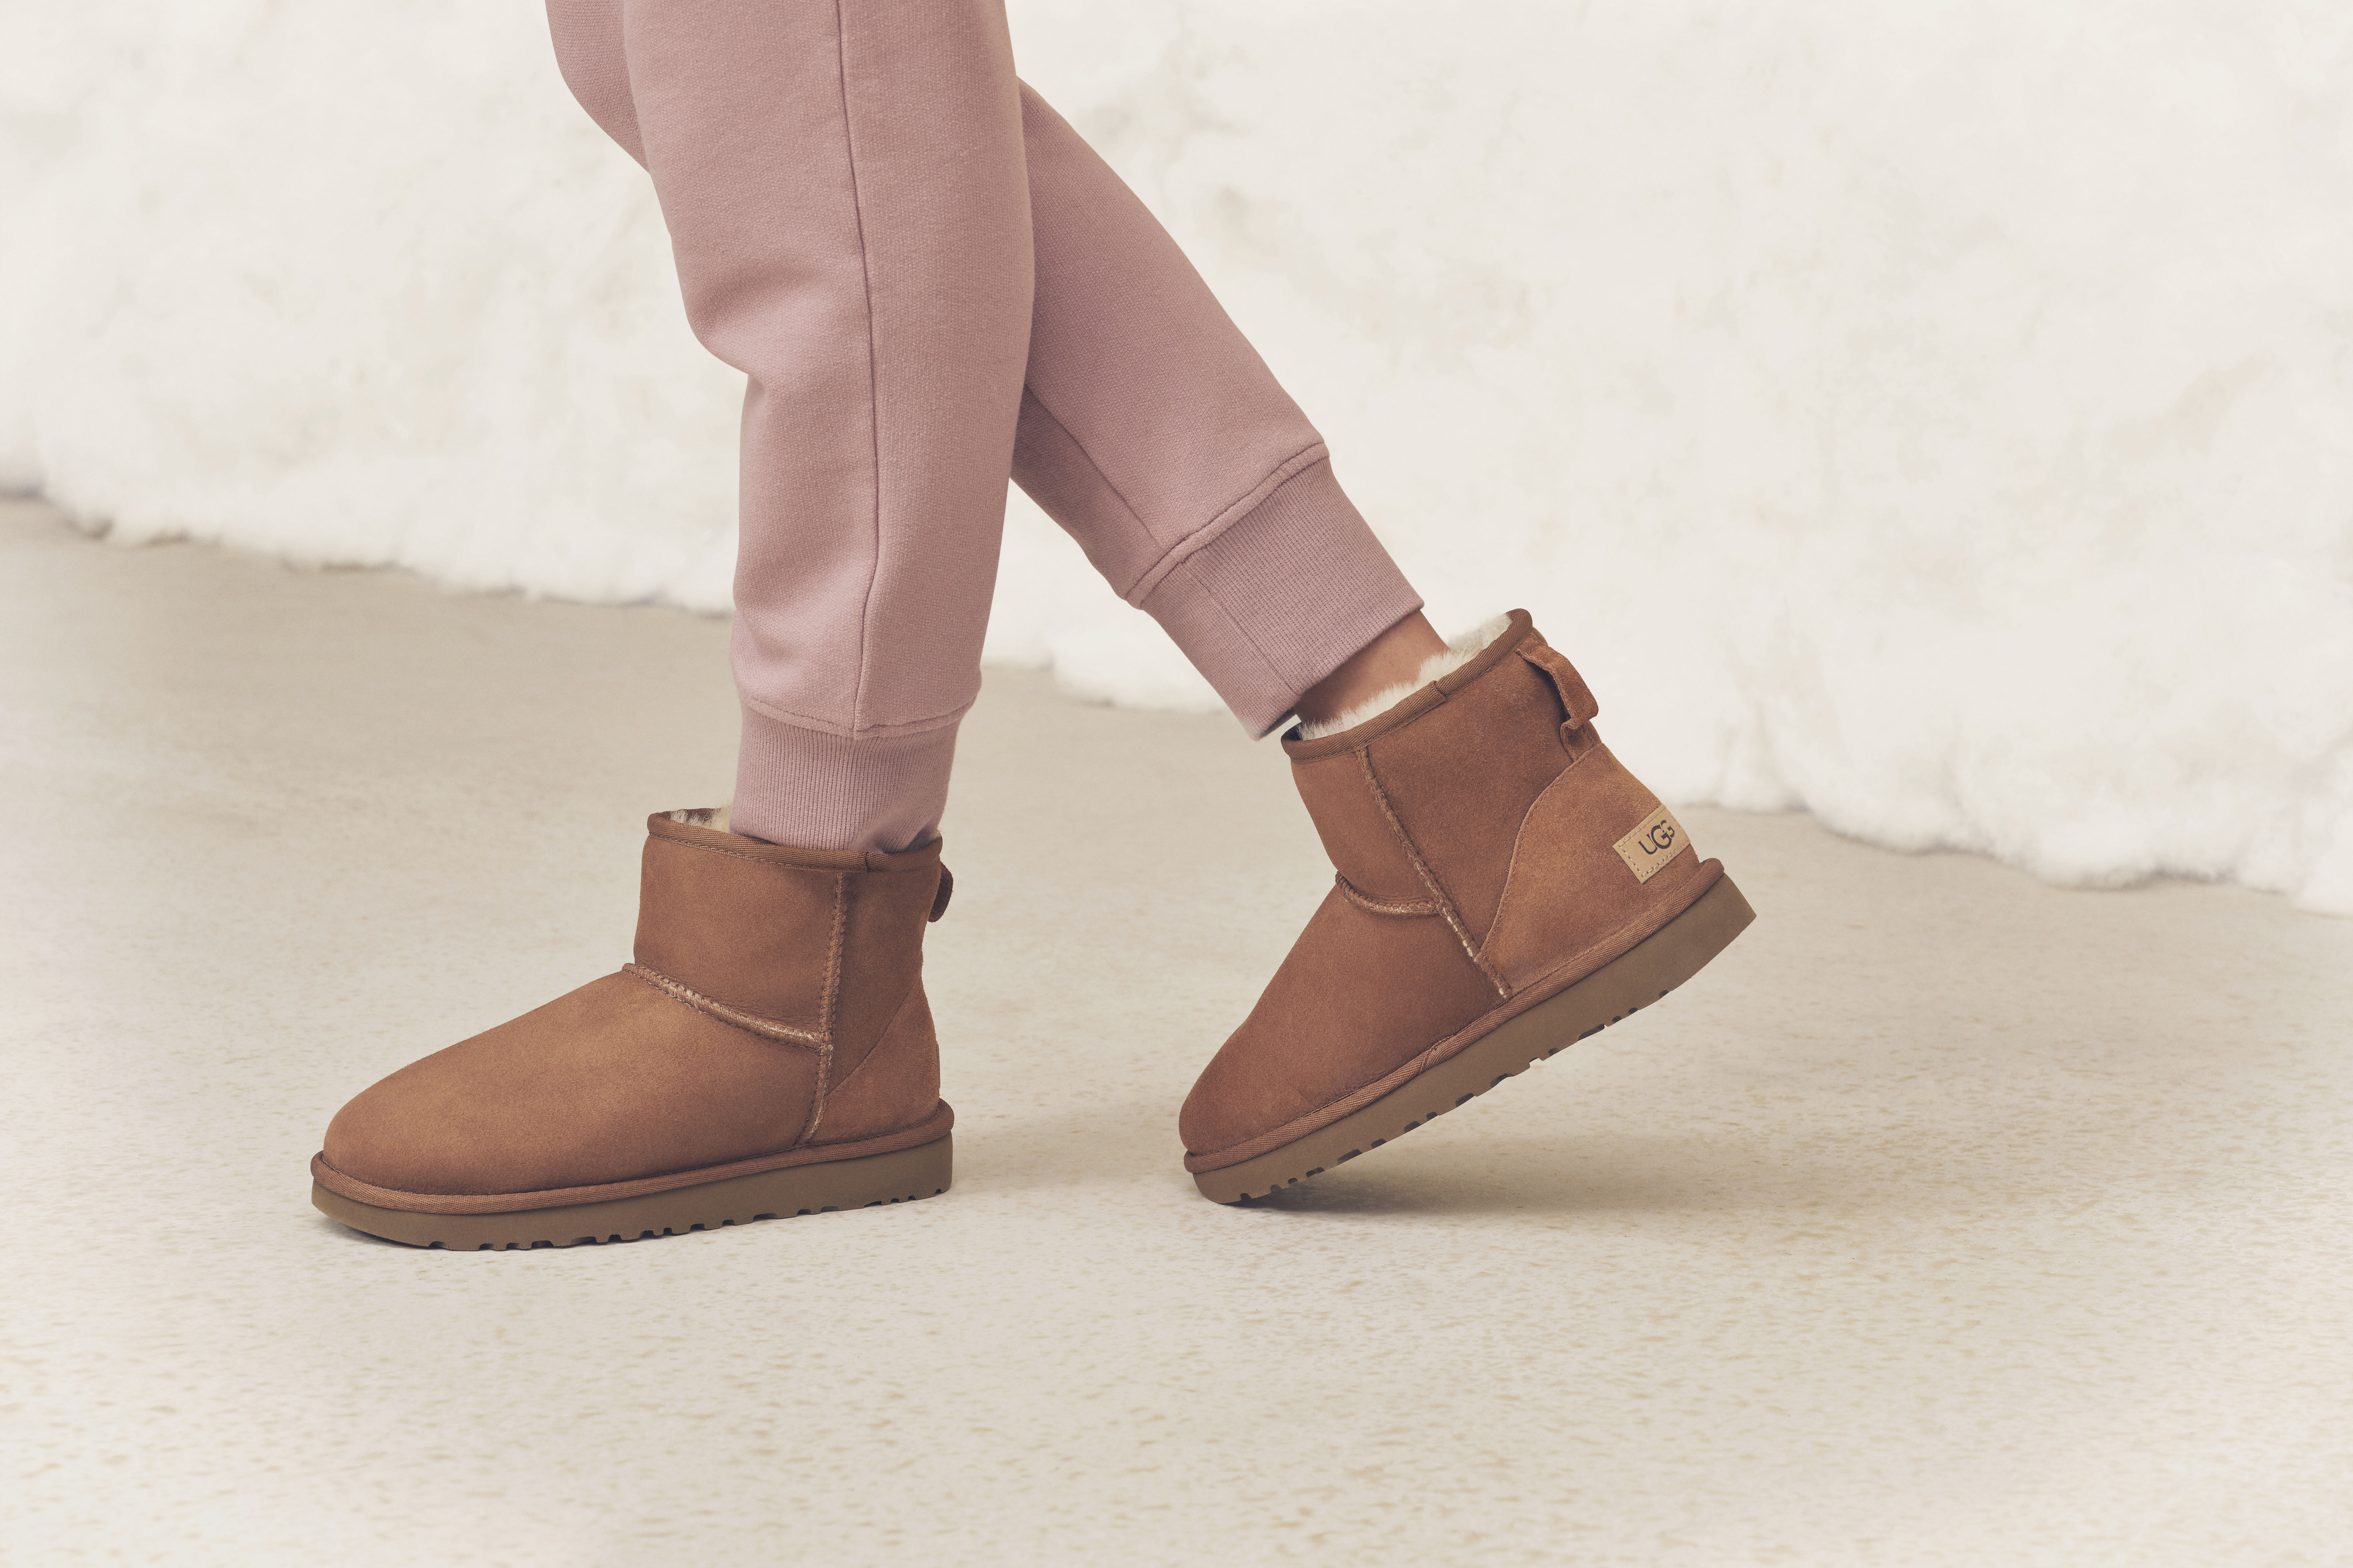 How to Wear UGGs Like It's 2021 (And Not 2001 at the Galleria Mall